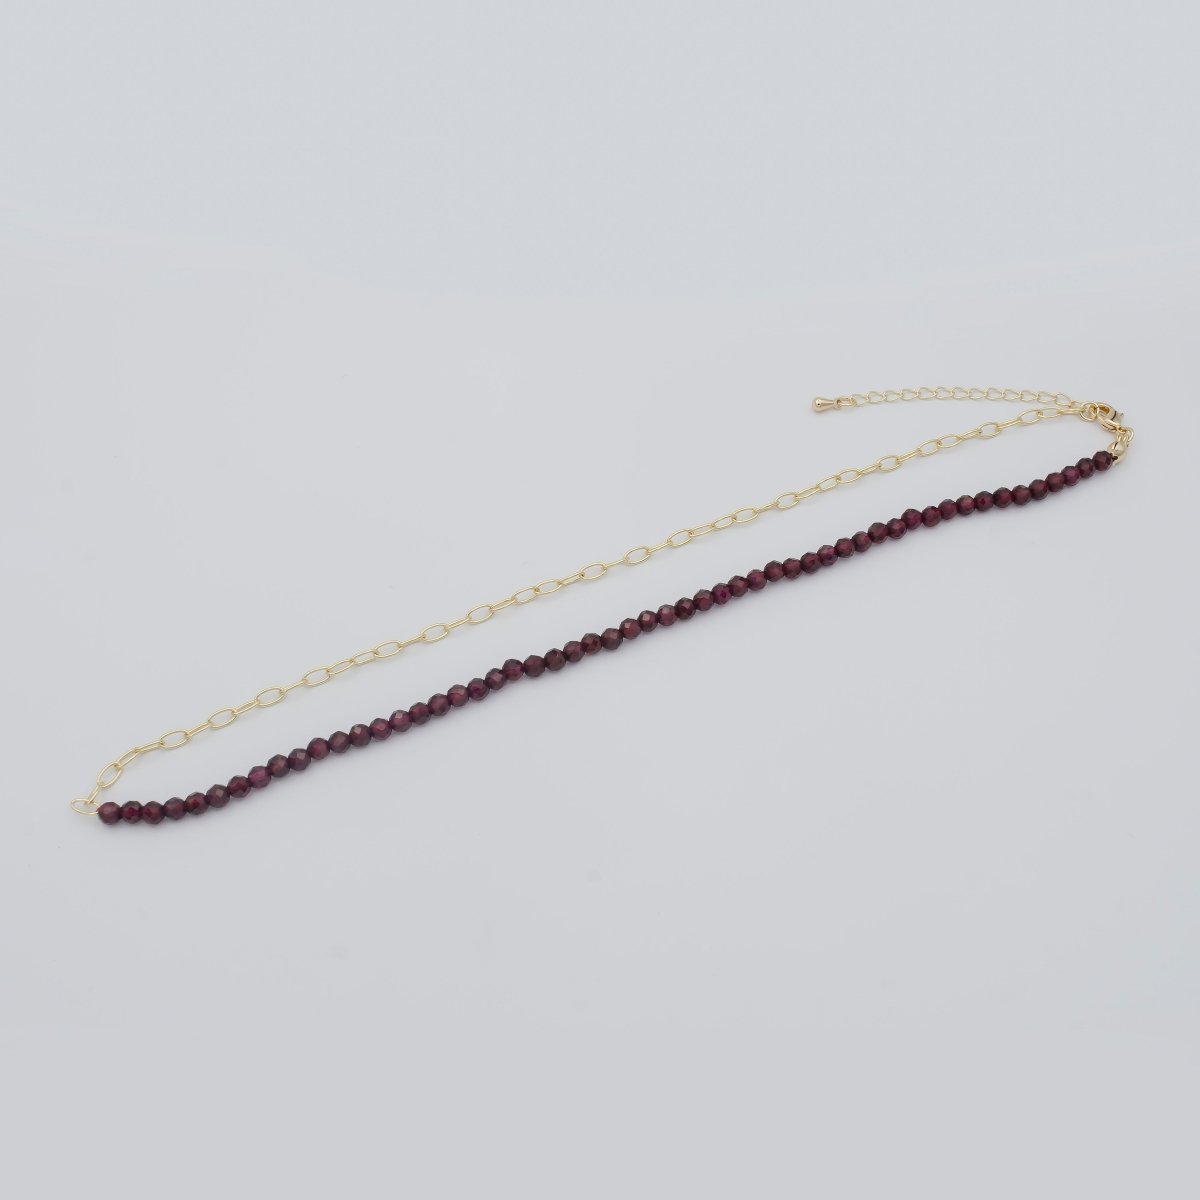 Fused 4mm Red Garnet Beads necklace w/ 14k Gold Filled Necklace, Mixed Oval Link Chain Necklace Ready To Wear Two Tone Necklace | WA-022 Clearance Pricing - DLUXCA